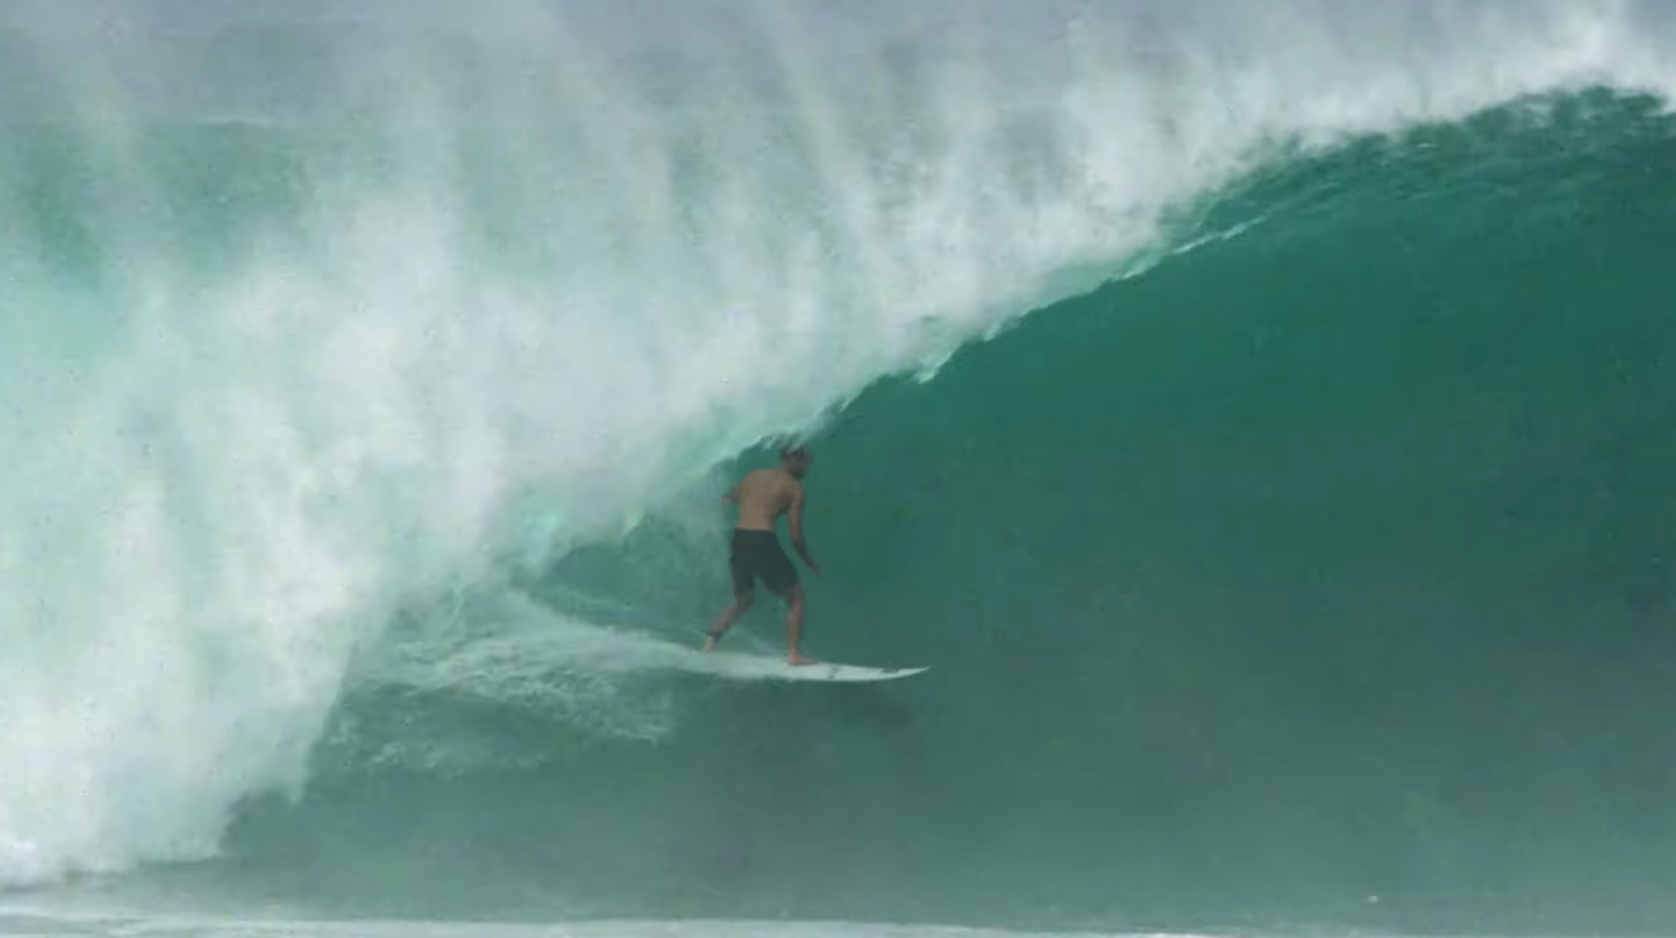 A Sneaky Favorite To Win The Vans Pipe Masters? Stab Mag